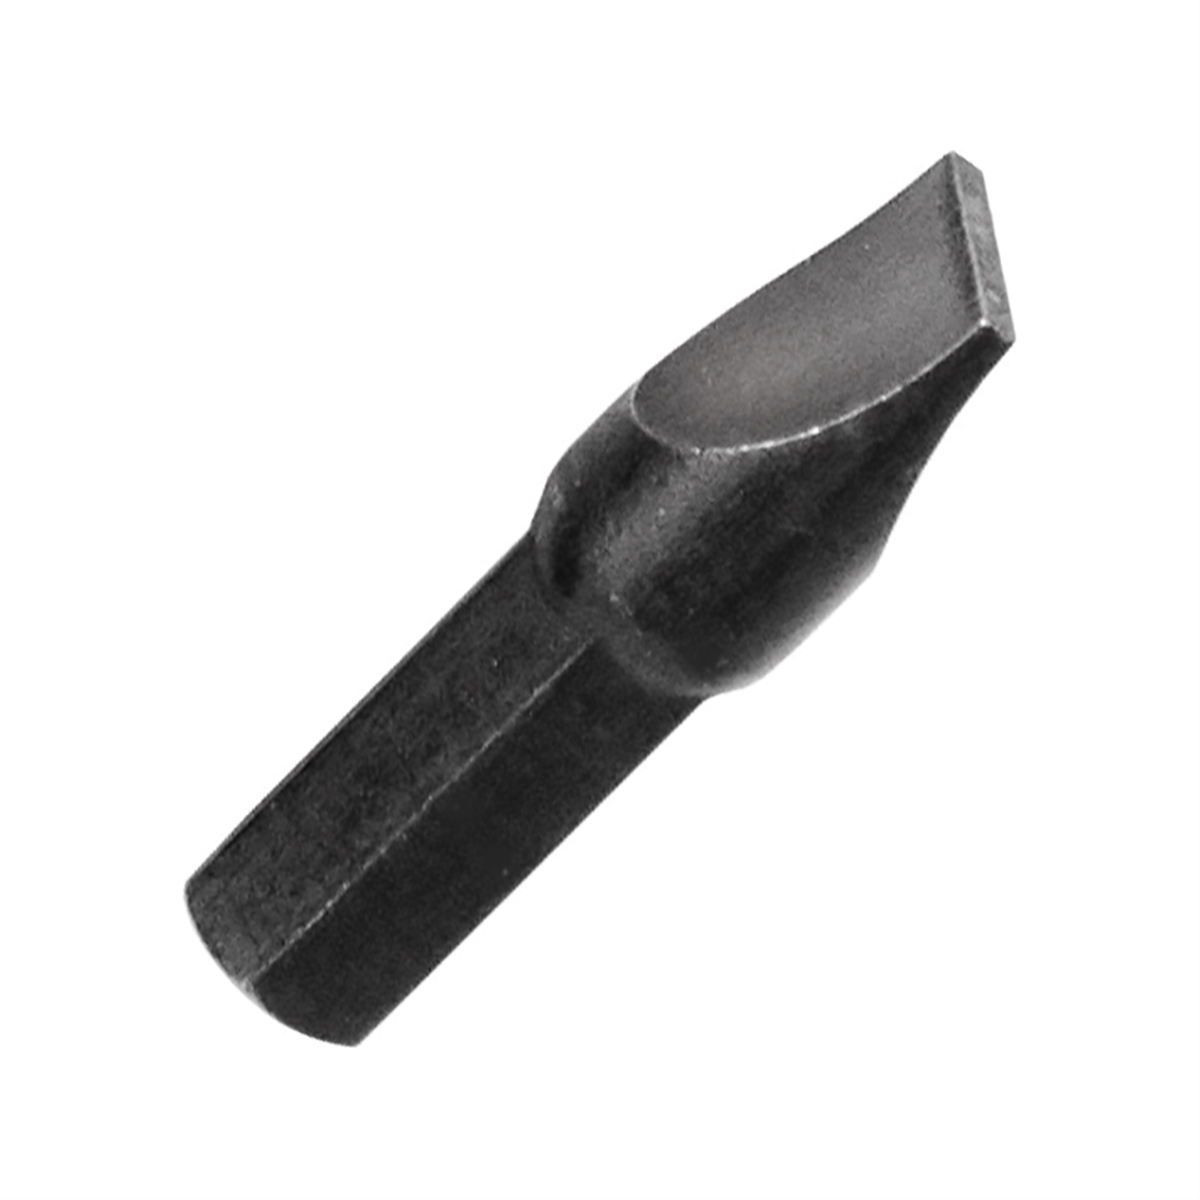 Screwdriver Bit - Large Slotted - 5/16 In Shank...